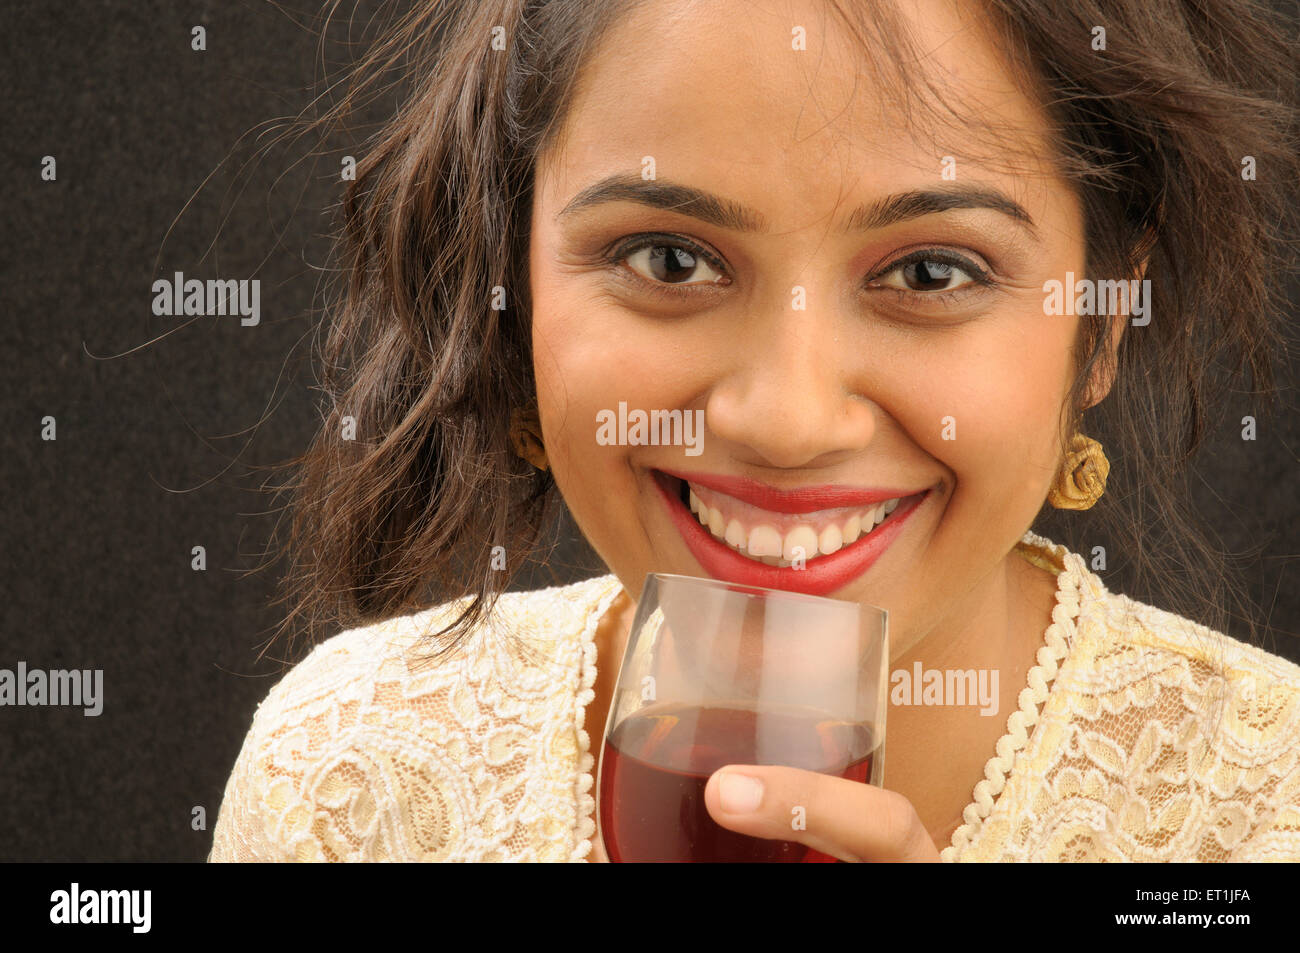 girl sipping glass of red wine   Model Released # 671 Stock Photo